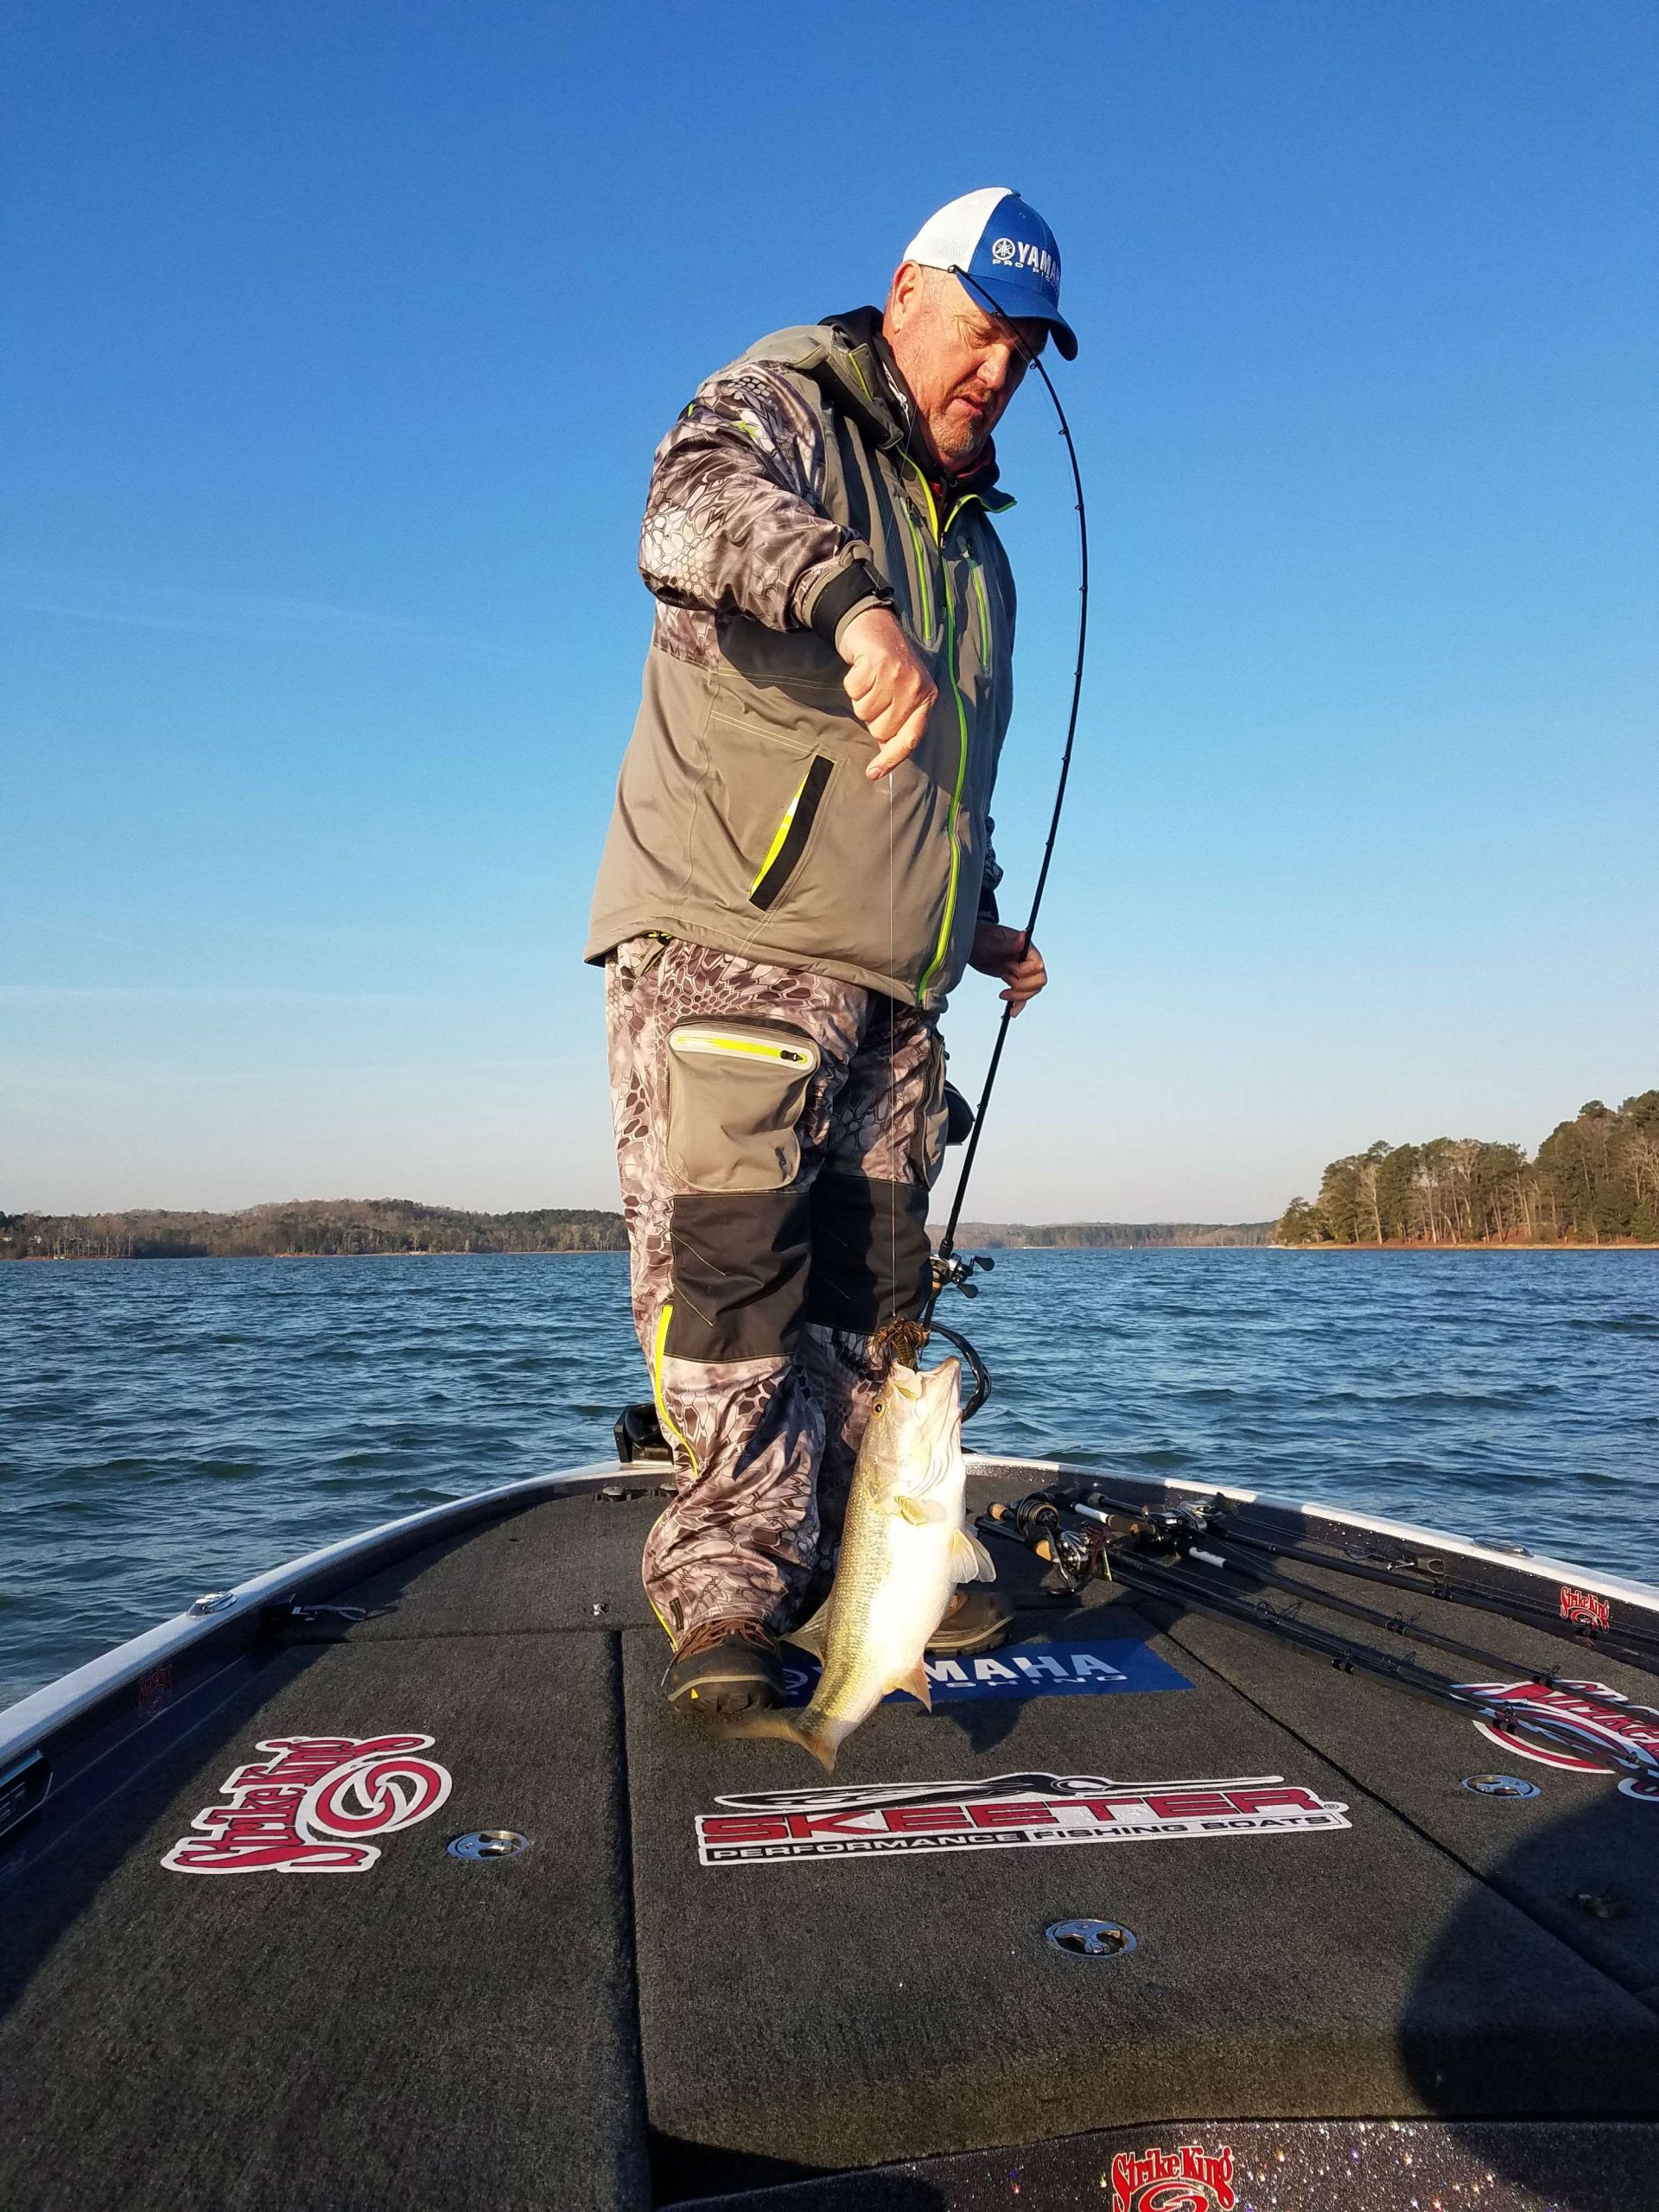 Mark Davis has caught his 4th keeper. It was a better fish, the kind he needs to build on for a good limit. He's fishing deep, slow, and methodical. 